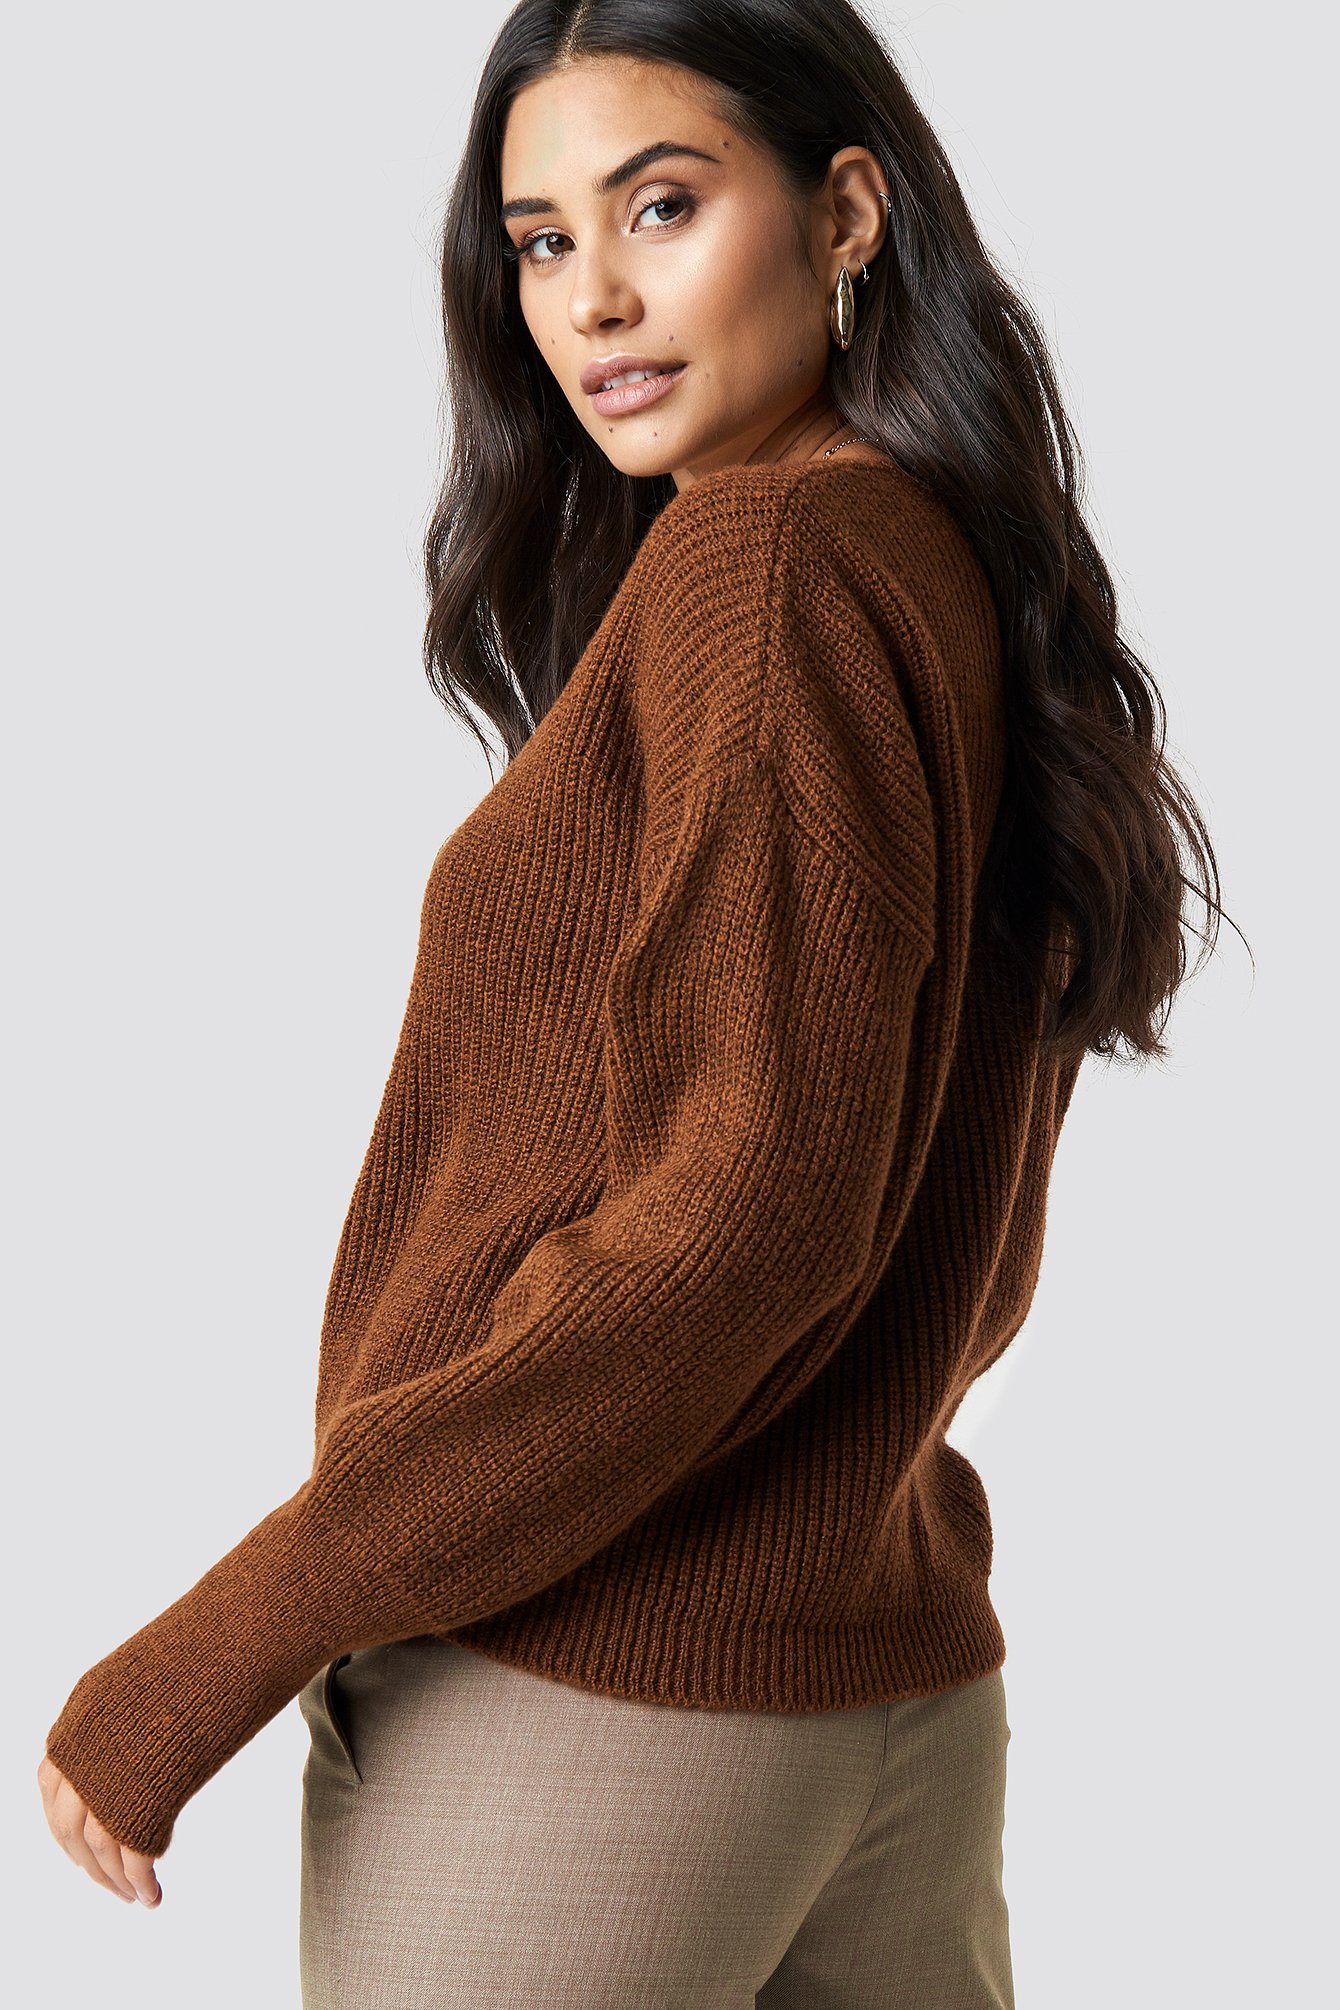 jury uvidenhed fumle Overlap Wide Cuff Knitted Sweater Brown | NA-KD